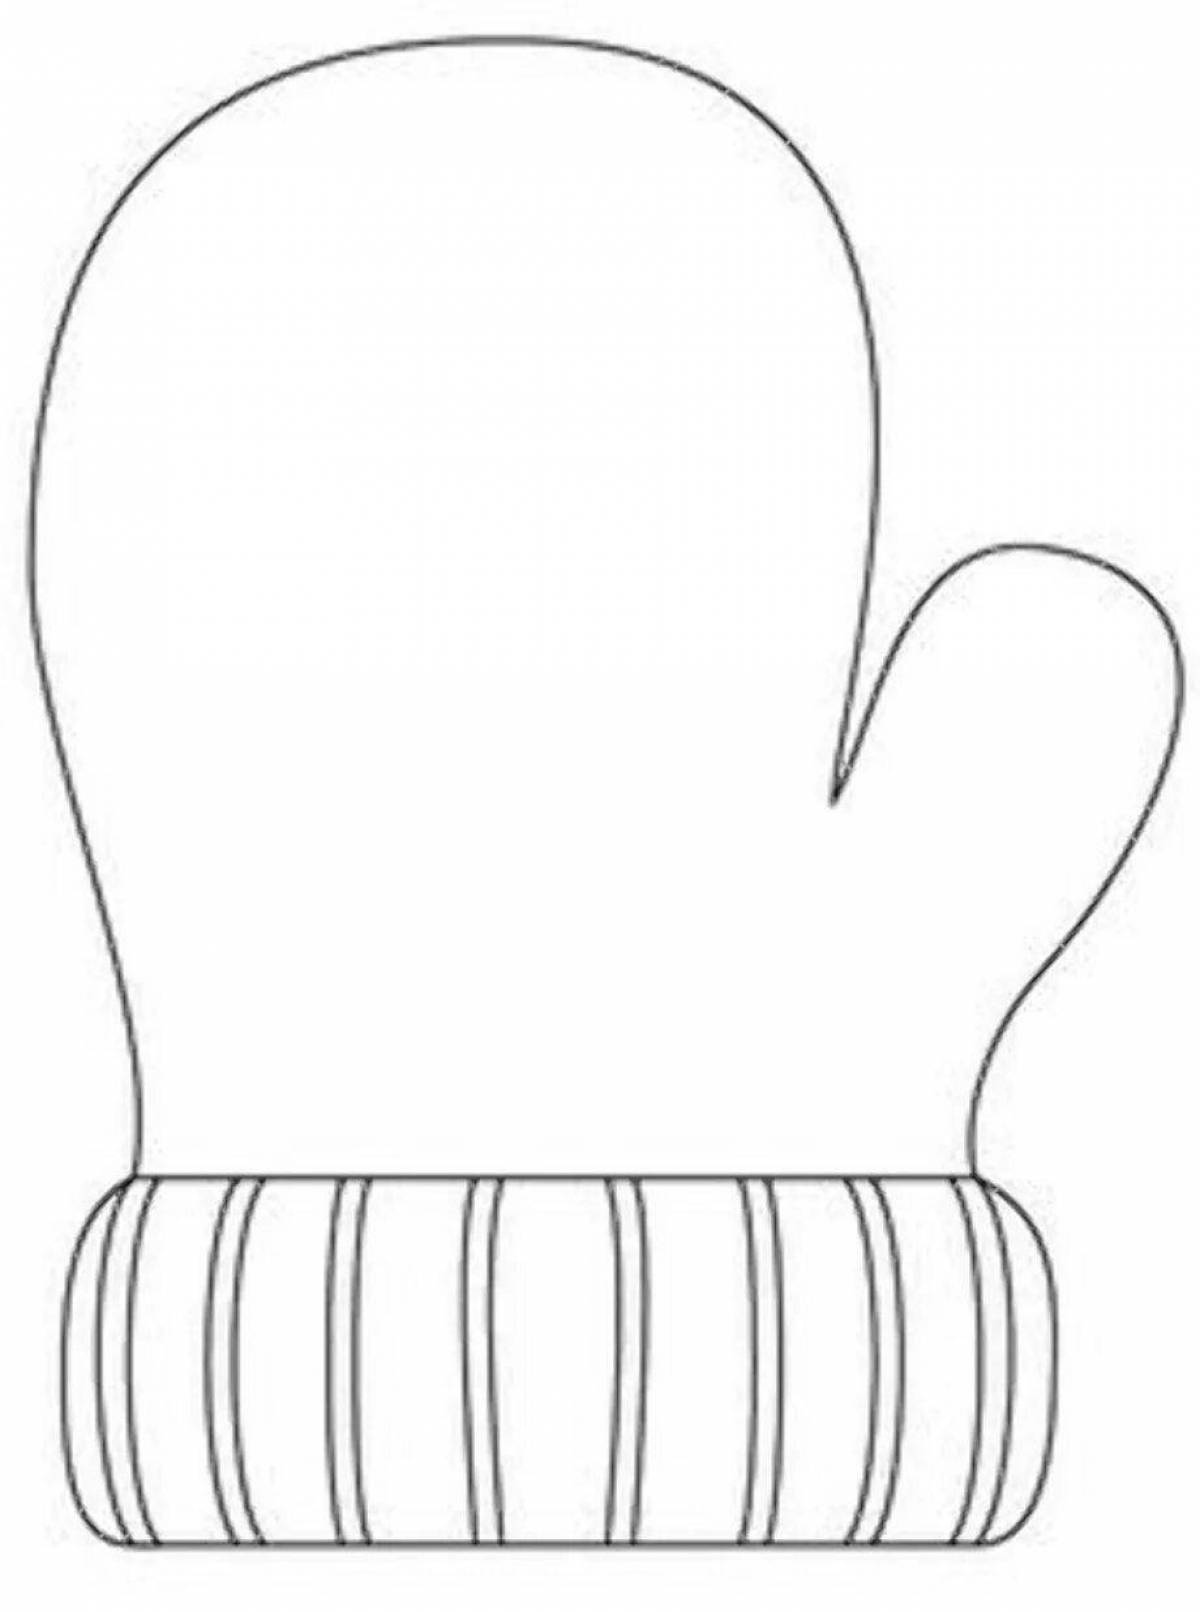 Outline of sparkling mittens